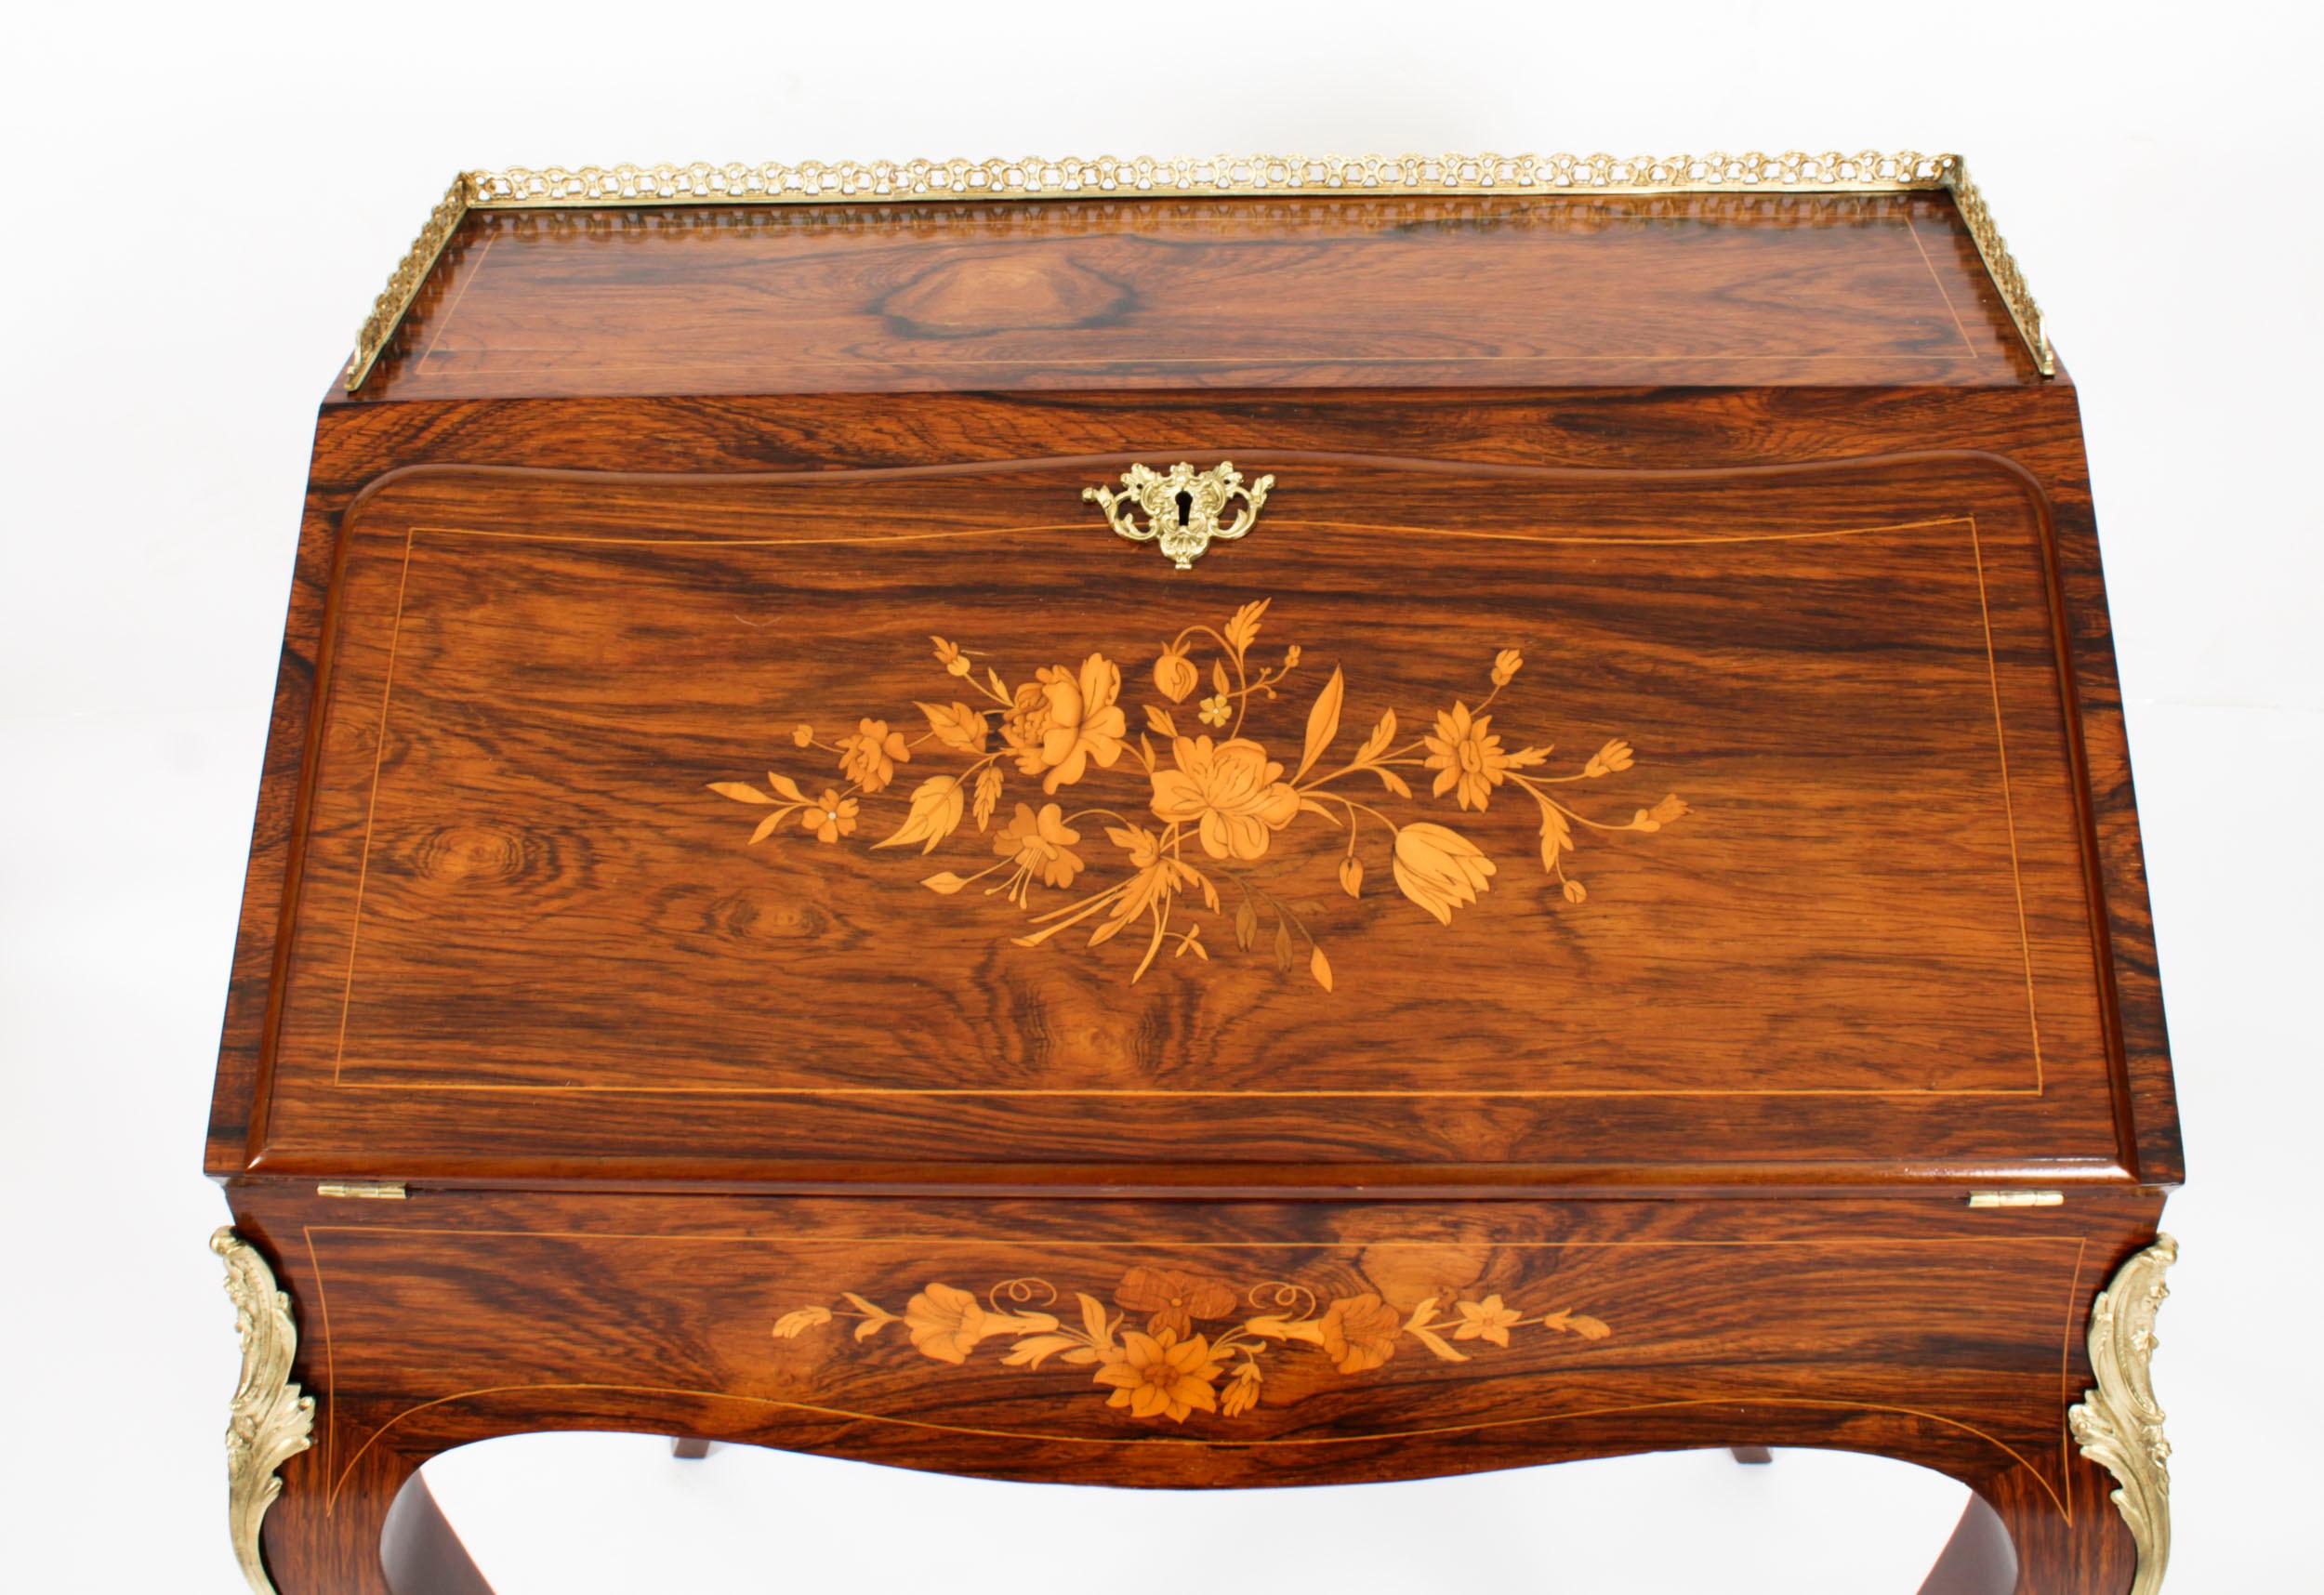 Antique French Gonçalo Alves Marquetry Bureau De Dame 19th C In Good Condition For Sale In London, GB